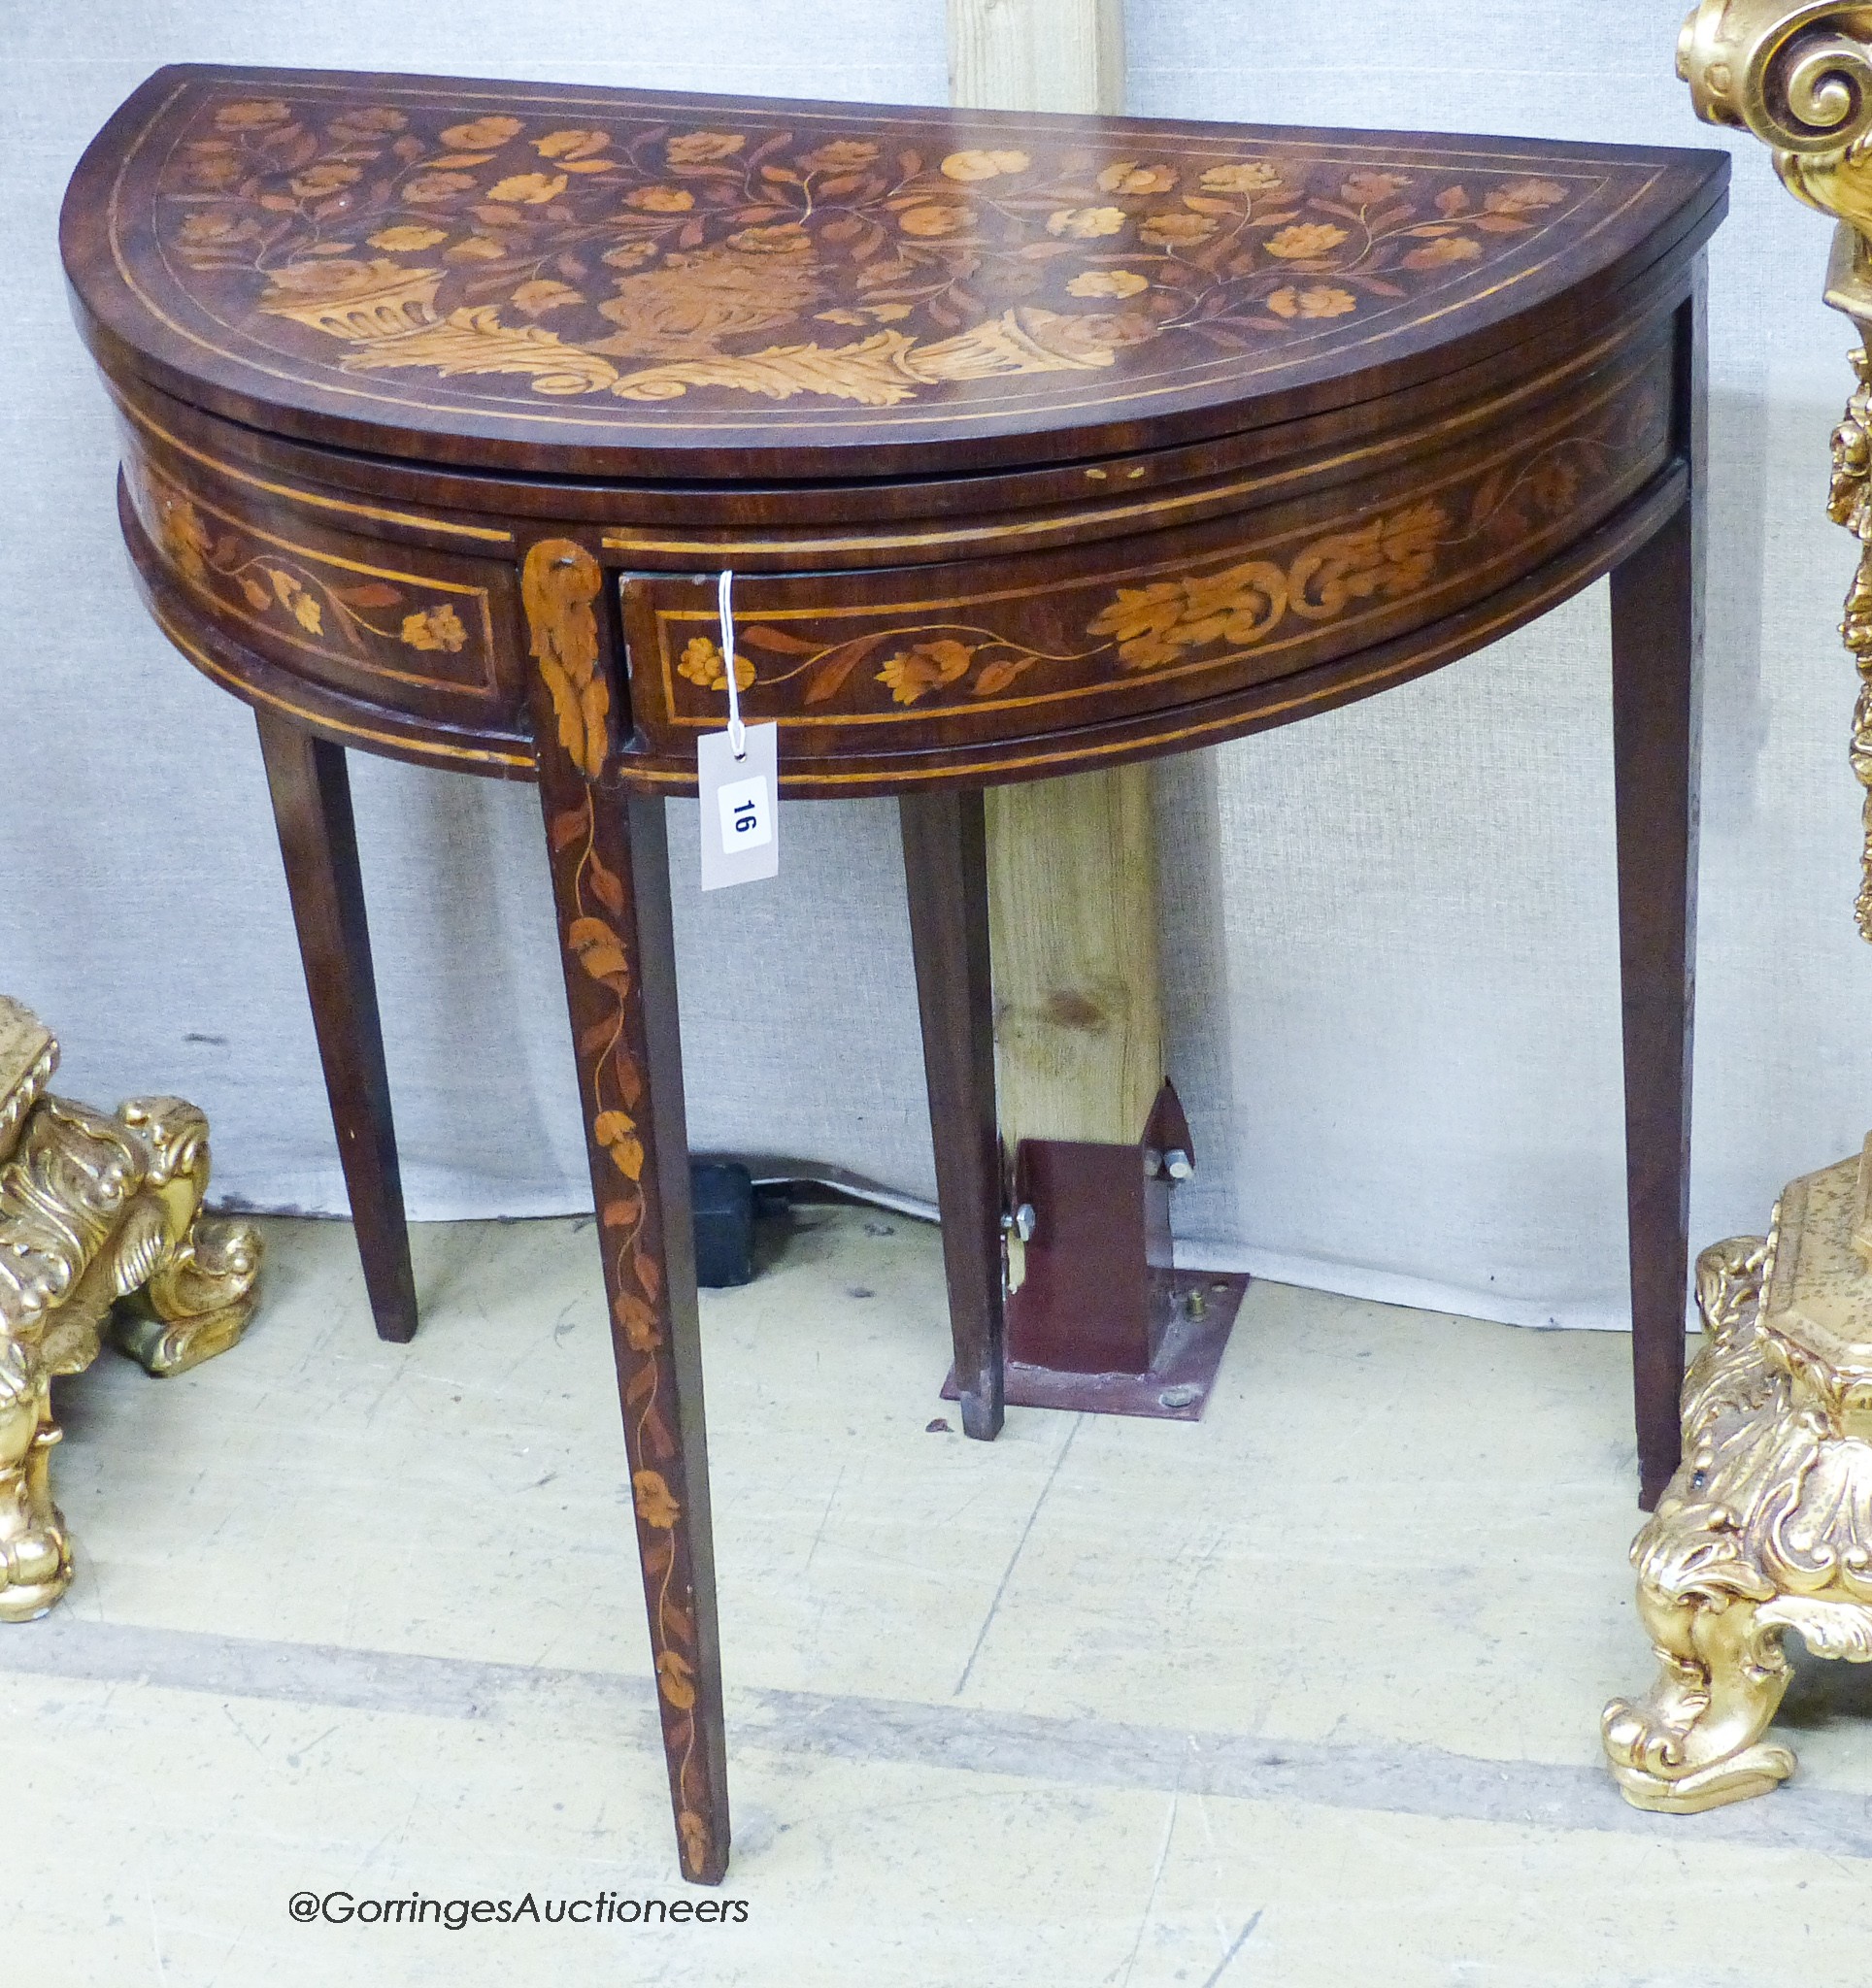 An early 19th century Dutch floral marquetry walnut D shaped folding card table, width 80cm, depth 45cm, height 76cm